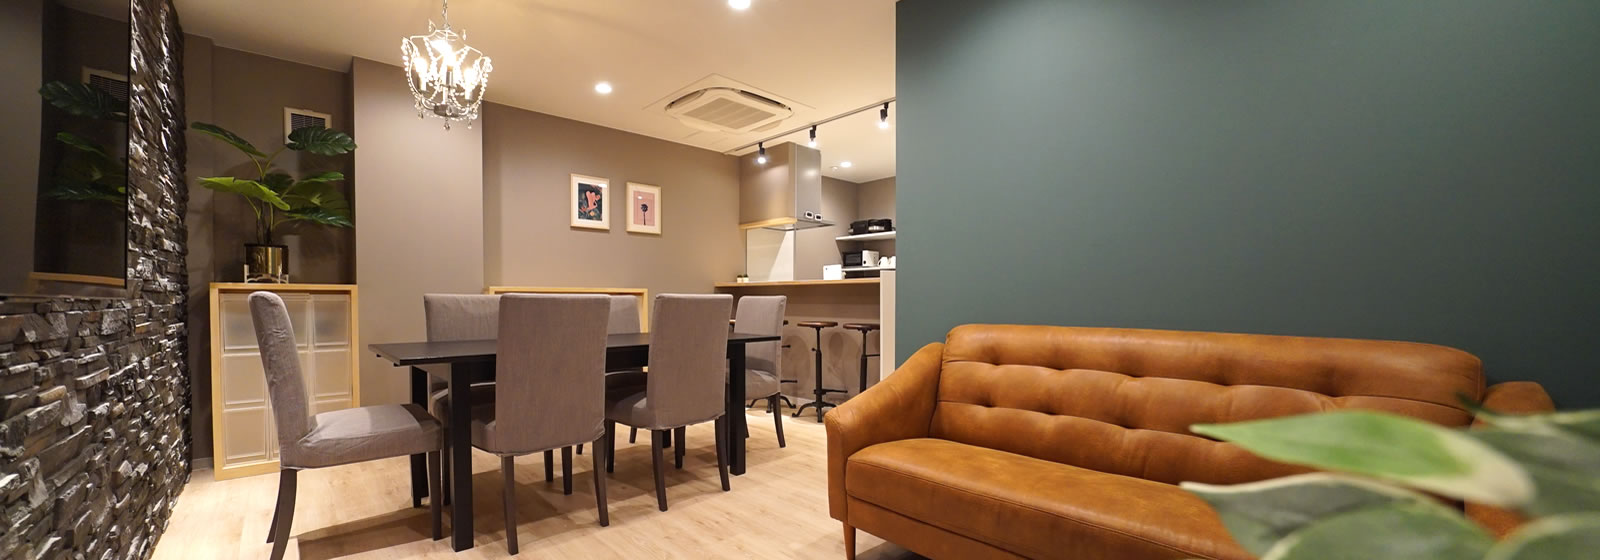 Couverture Ueno-matsugaya Male and female OK share house which opened in February 2019. FROM 42,000 yen